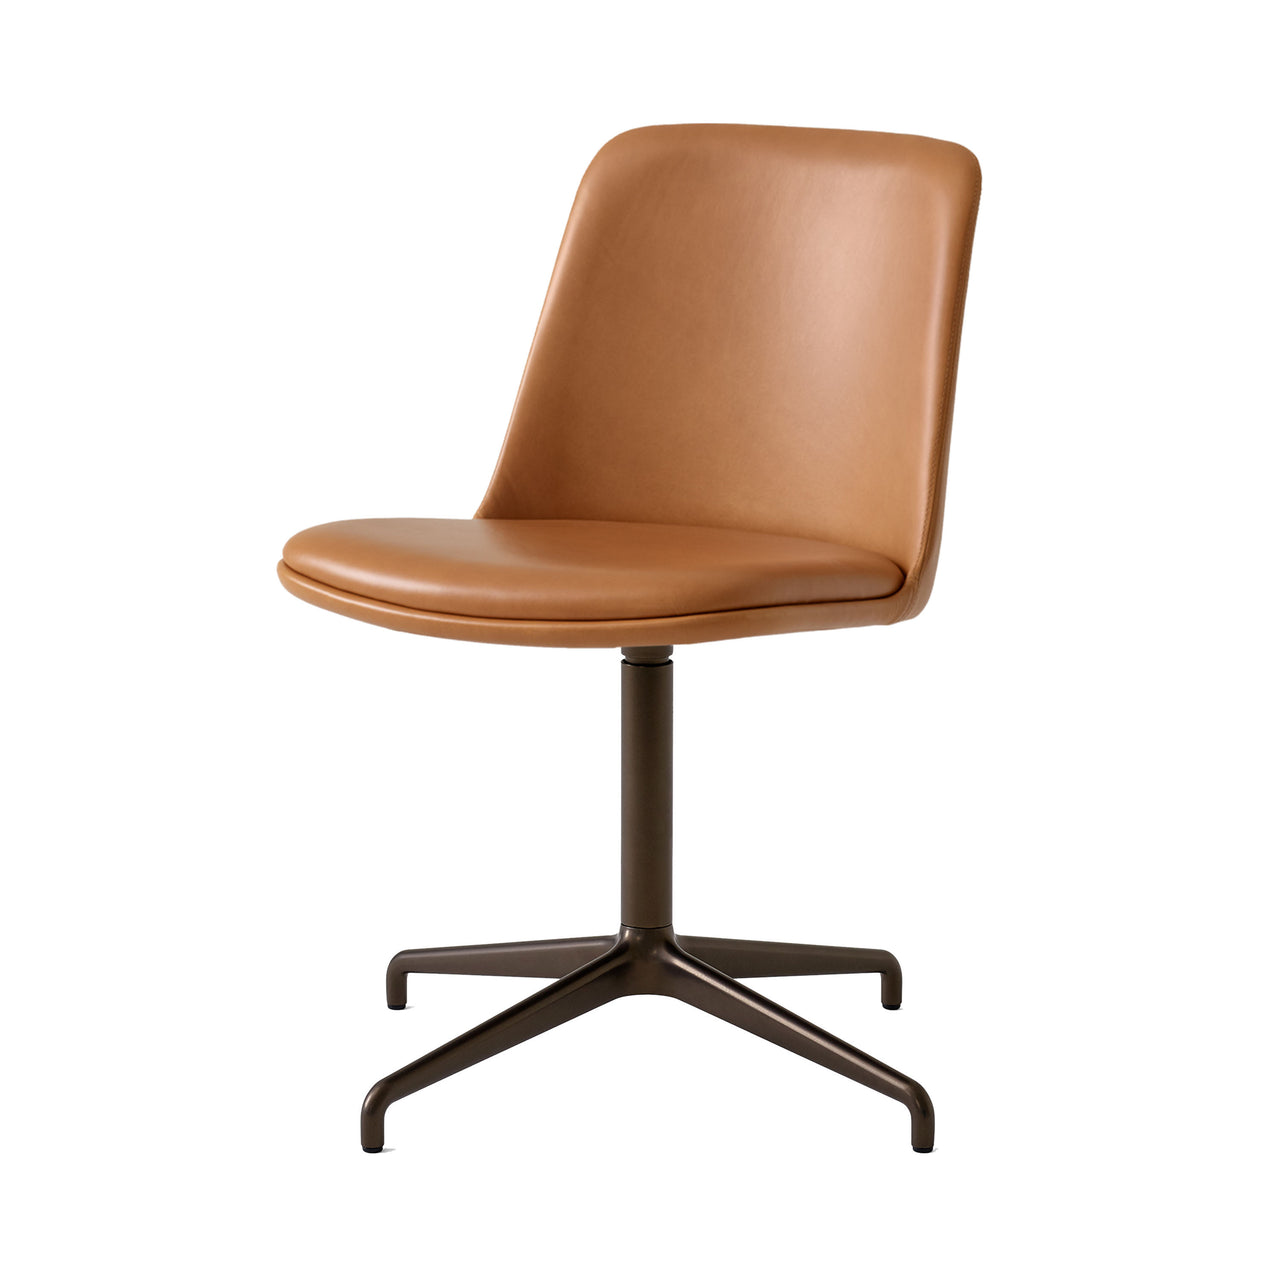 Rely Chair HW19: Bronzed